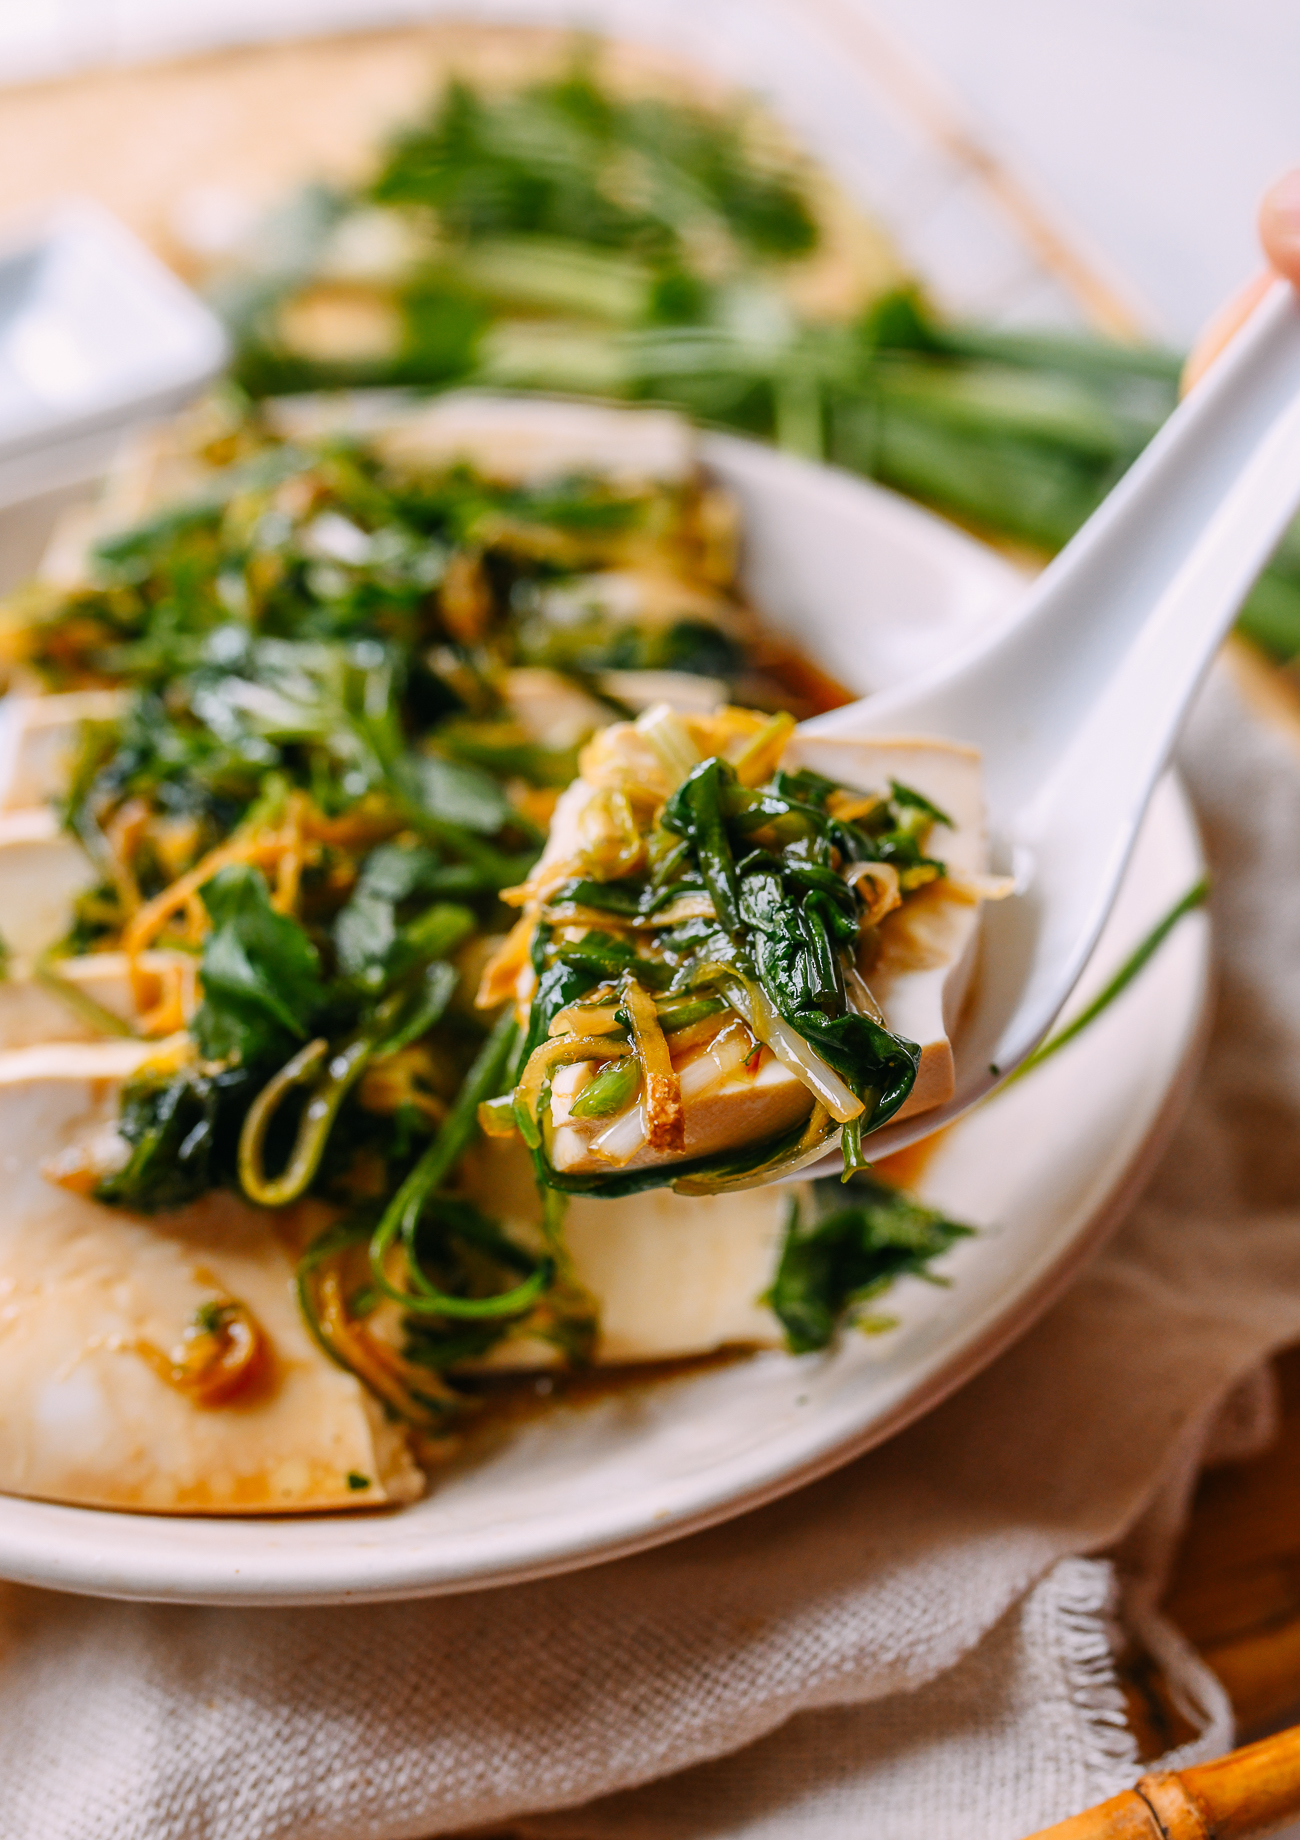 Steamed tofu with soy sauce, ginger, and scallions, inspired by steamed fish